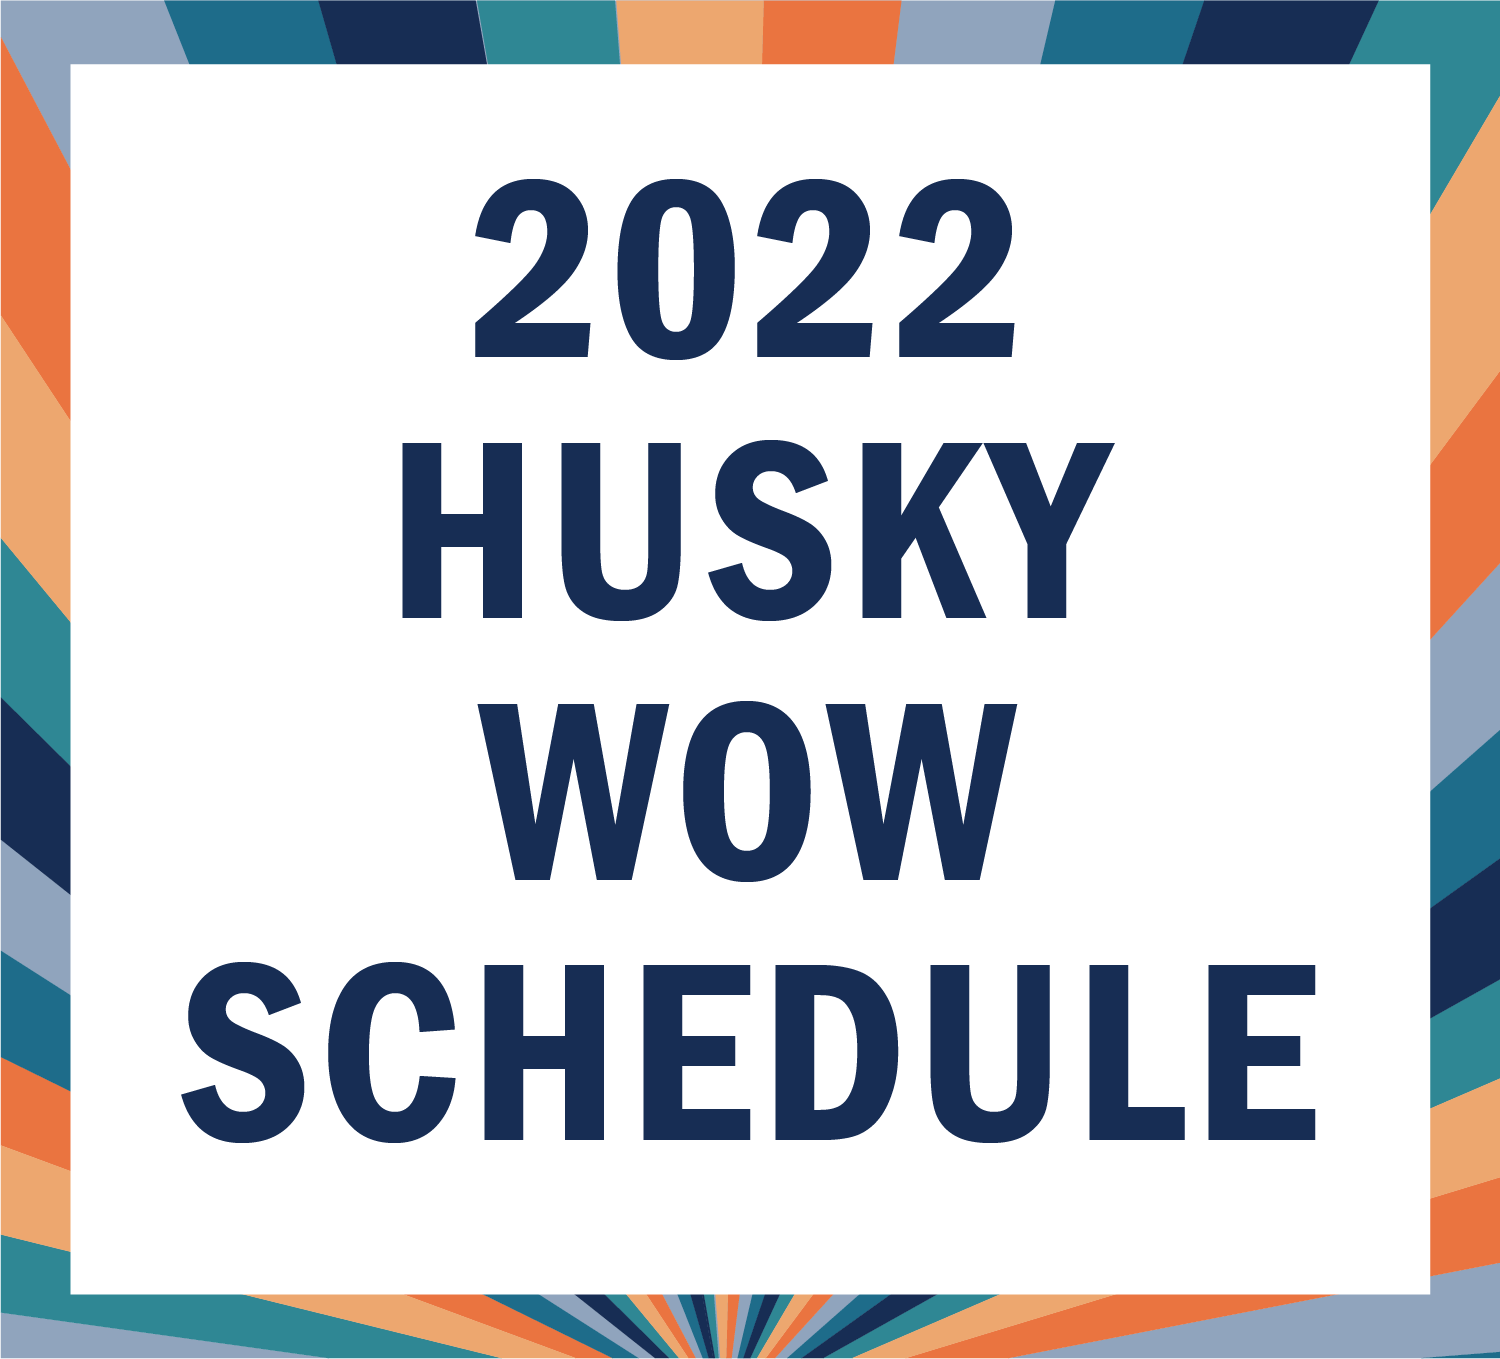 2022 wow sched button